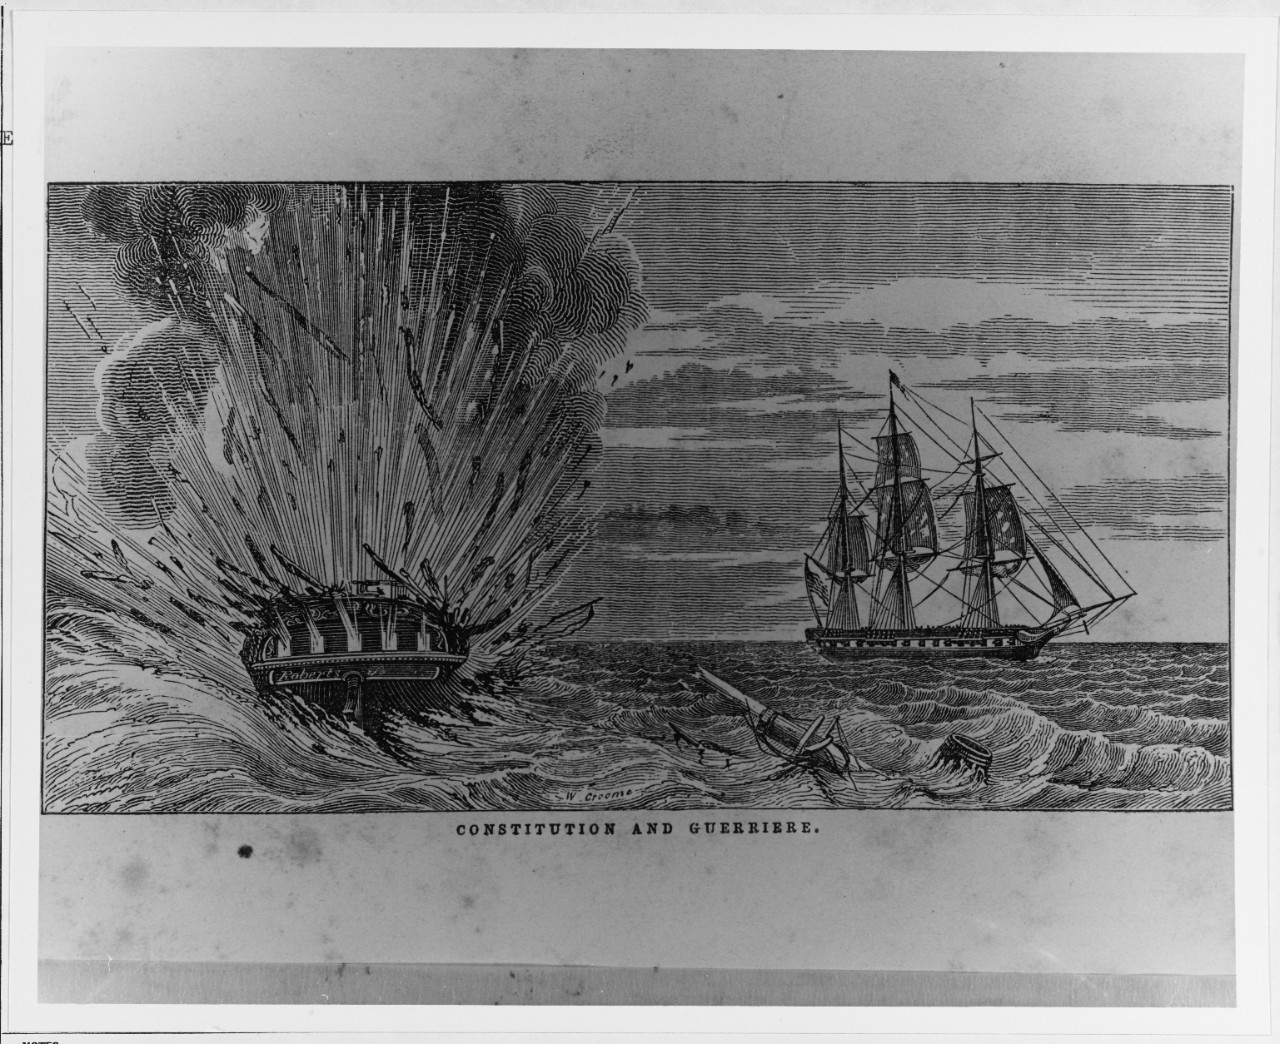 Photo #: NH 42070  Action between USS Constitution and HMS Guerriere, 19 August 1812